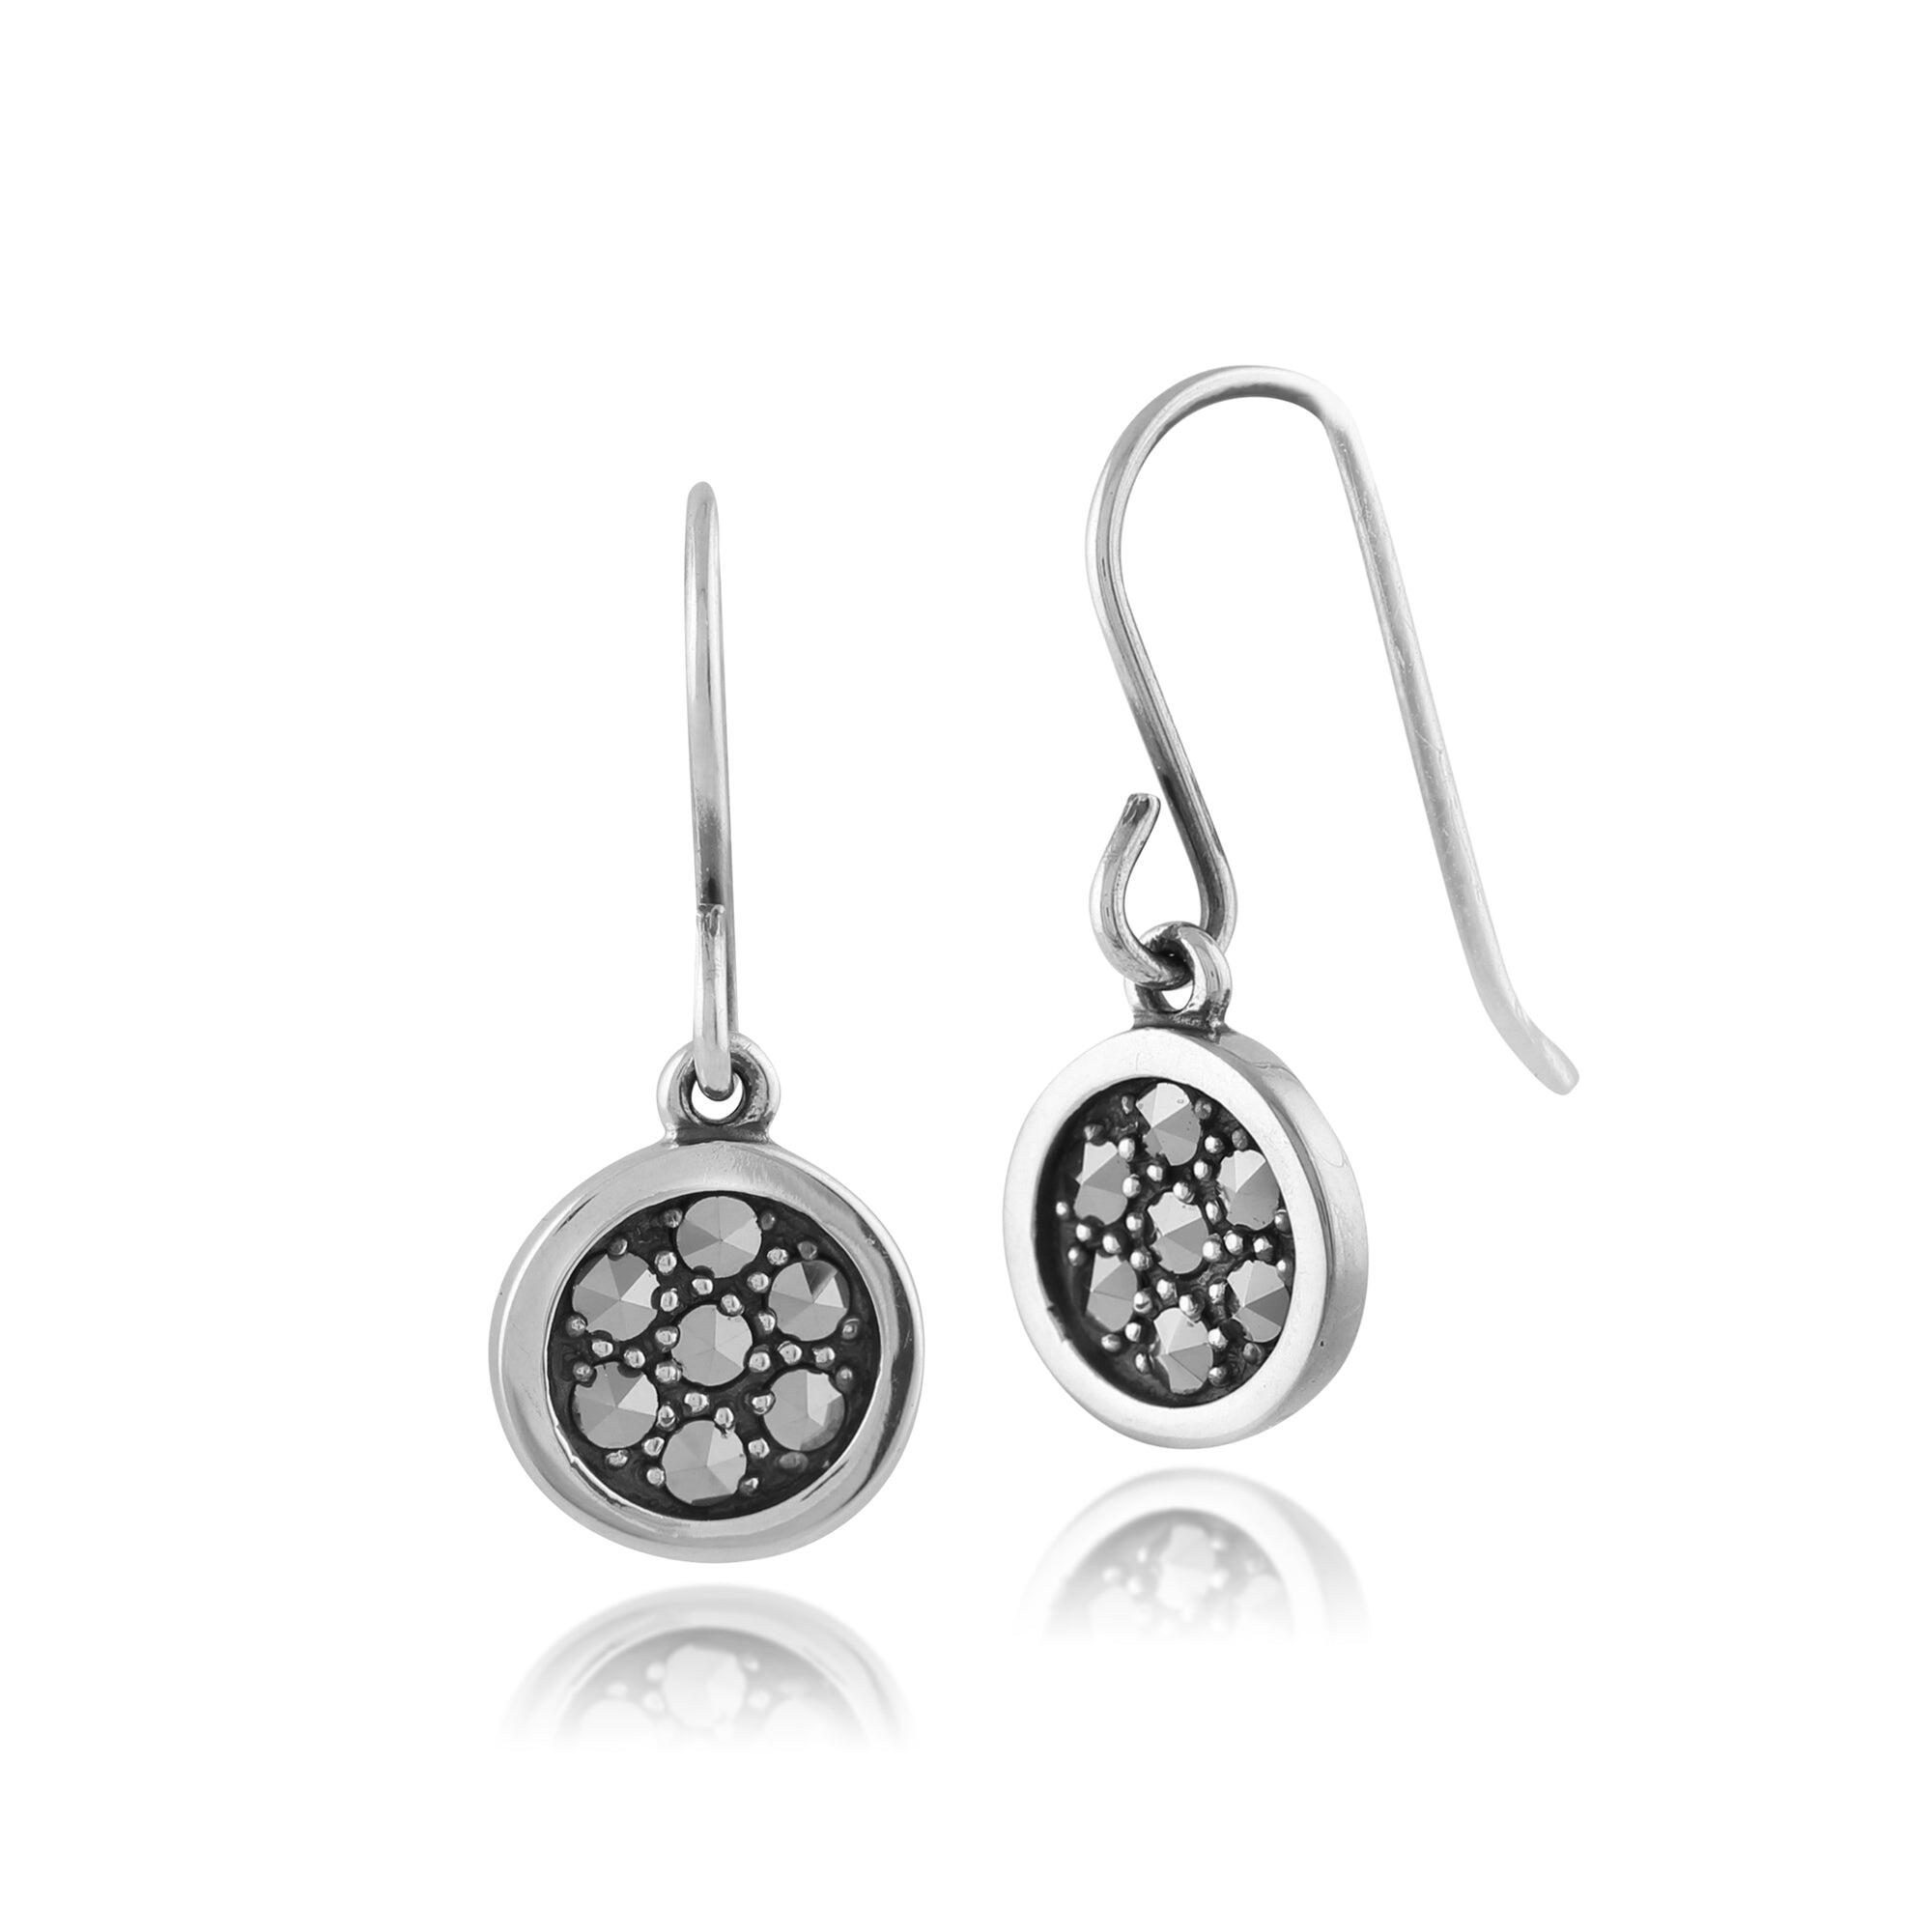 Classic Round Pave Set Marcasite Drop Earrings in 925 Sterling Silver